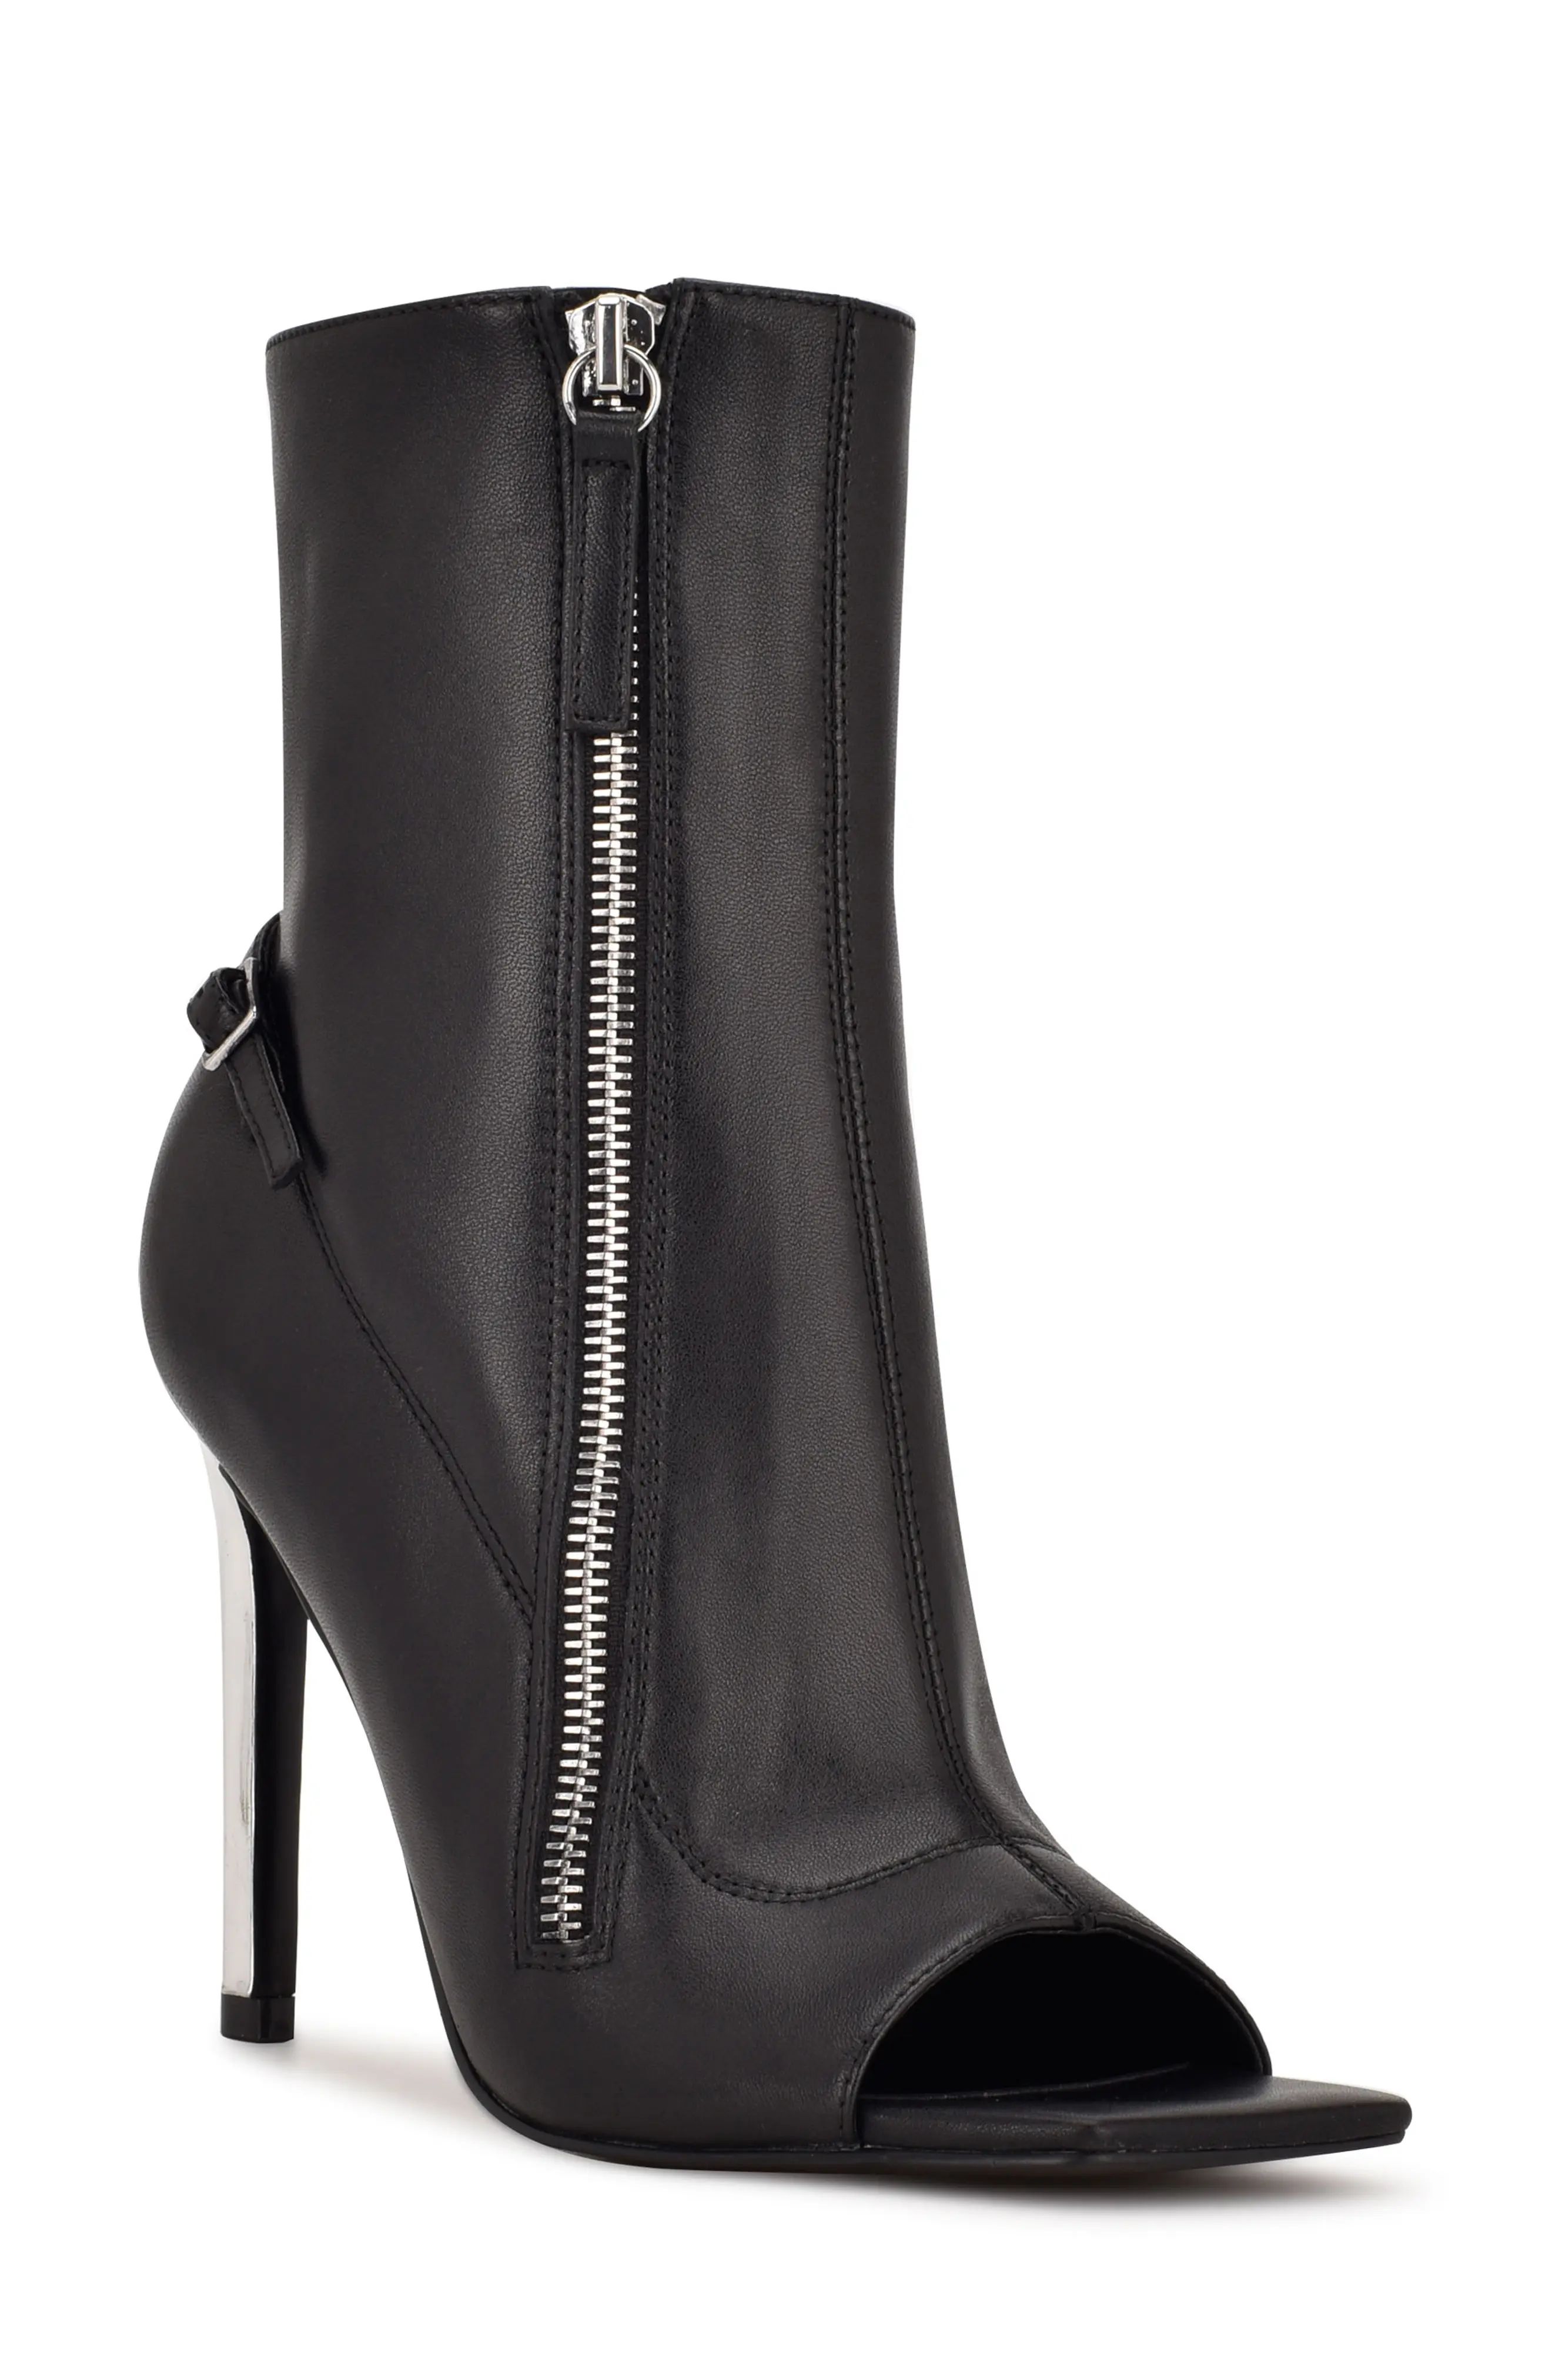 Nine West Sohot Peep Toe Bootie in Black Leather at Nordstrom, Size 7.5 | Nordstrom